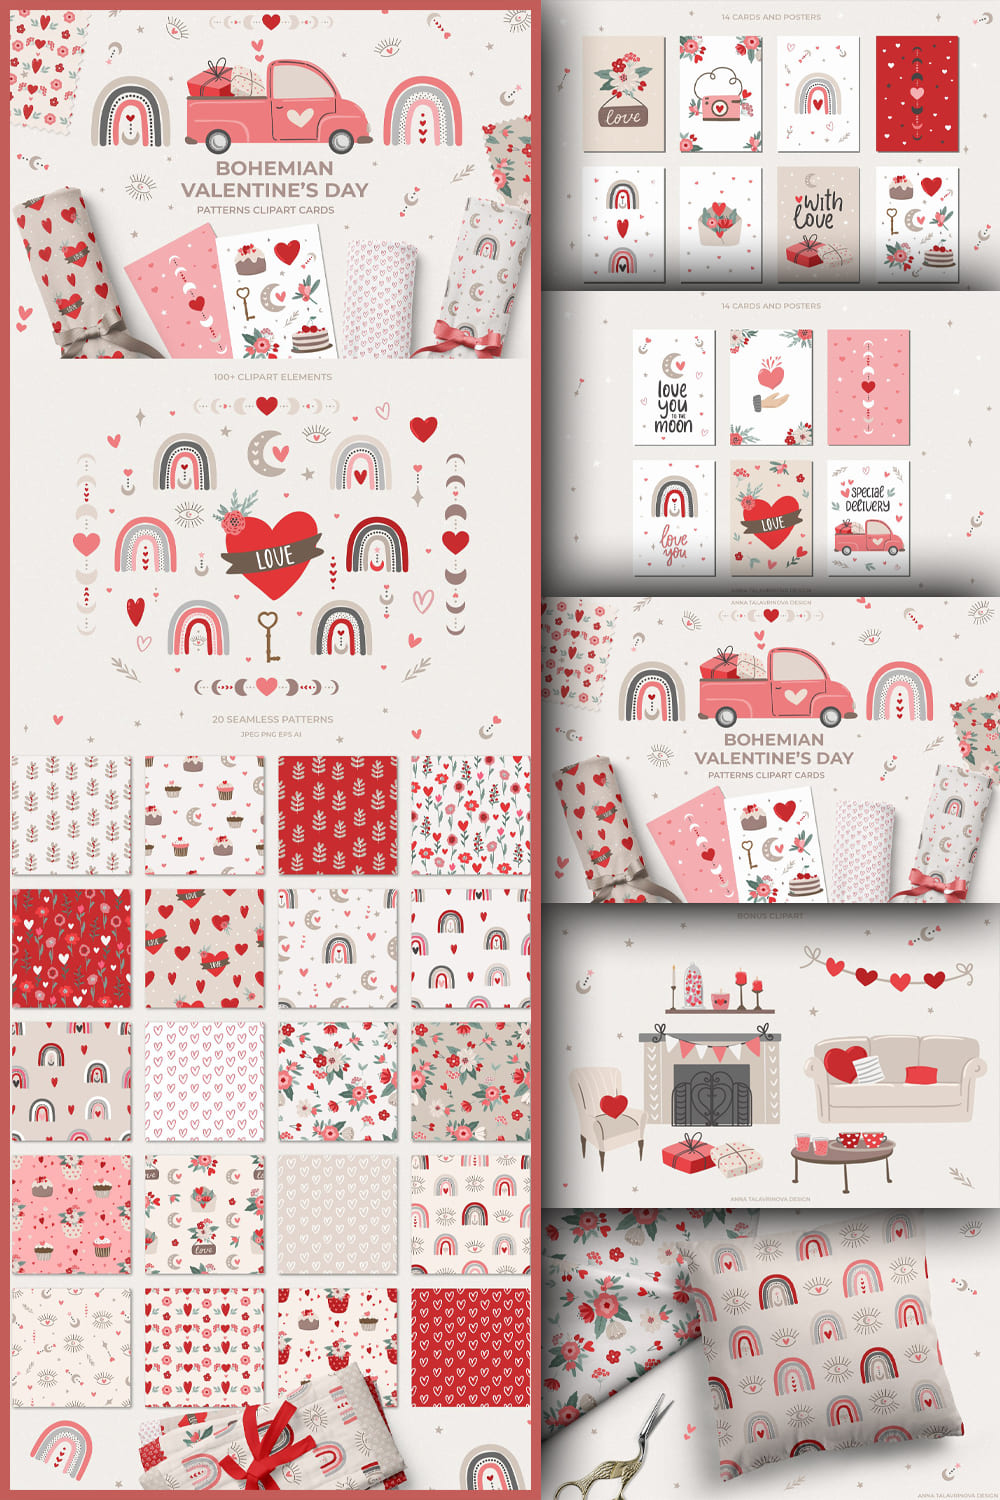 Boho Valentine's Day Pattern Clipart - pinterest image preview.